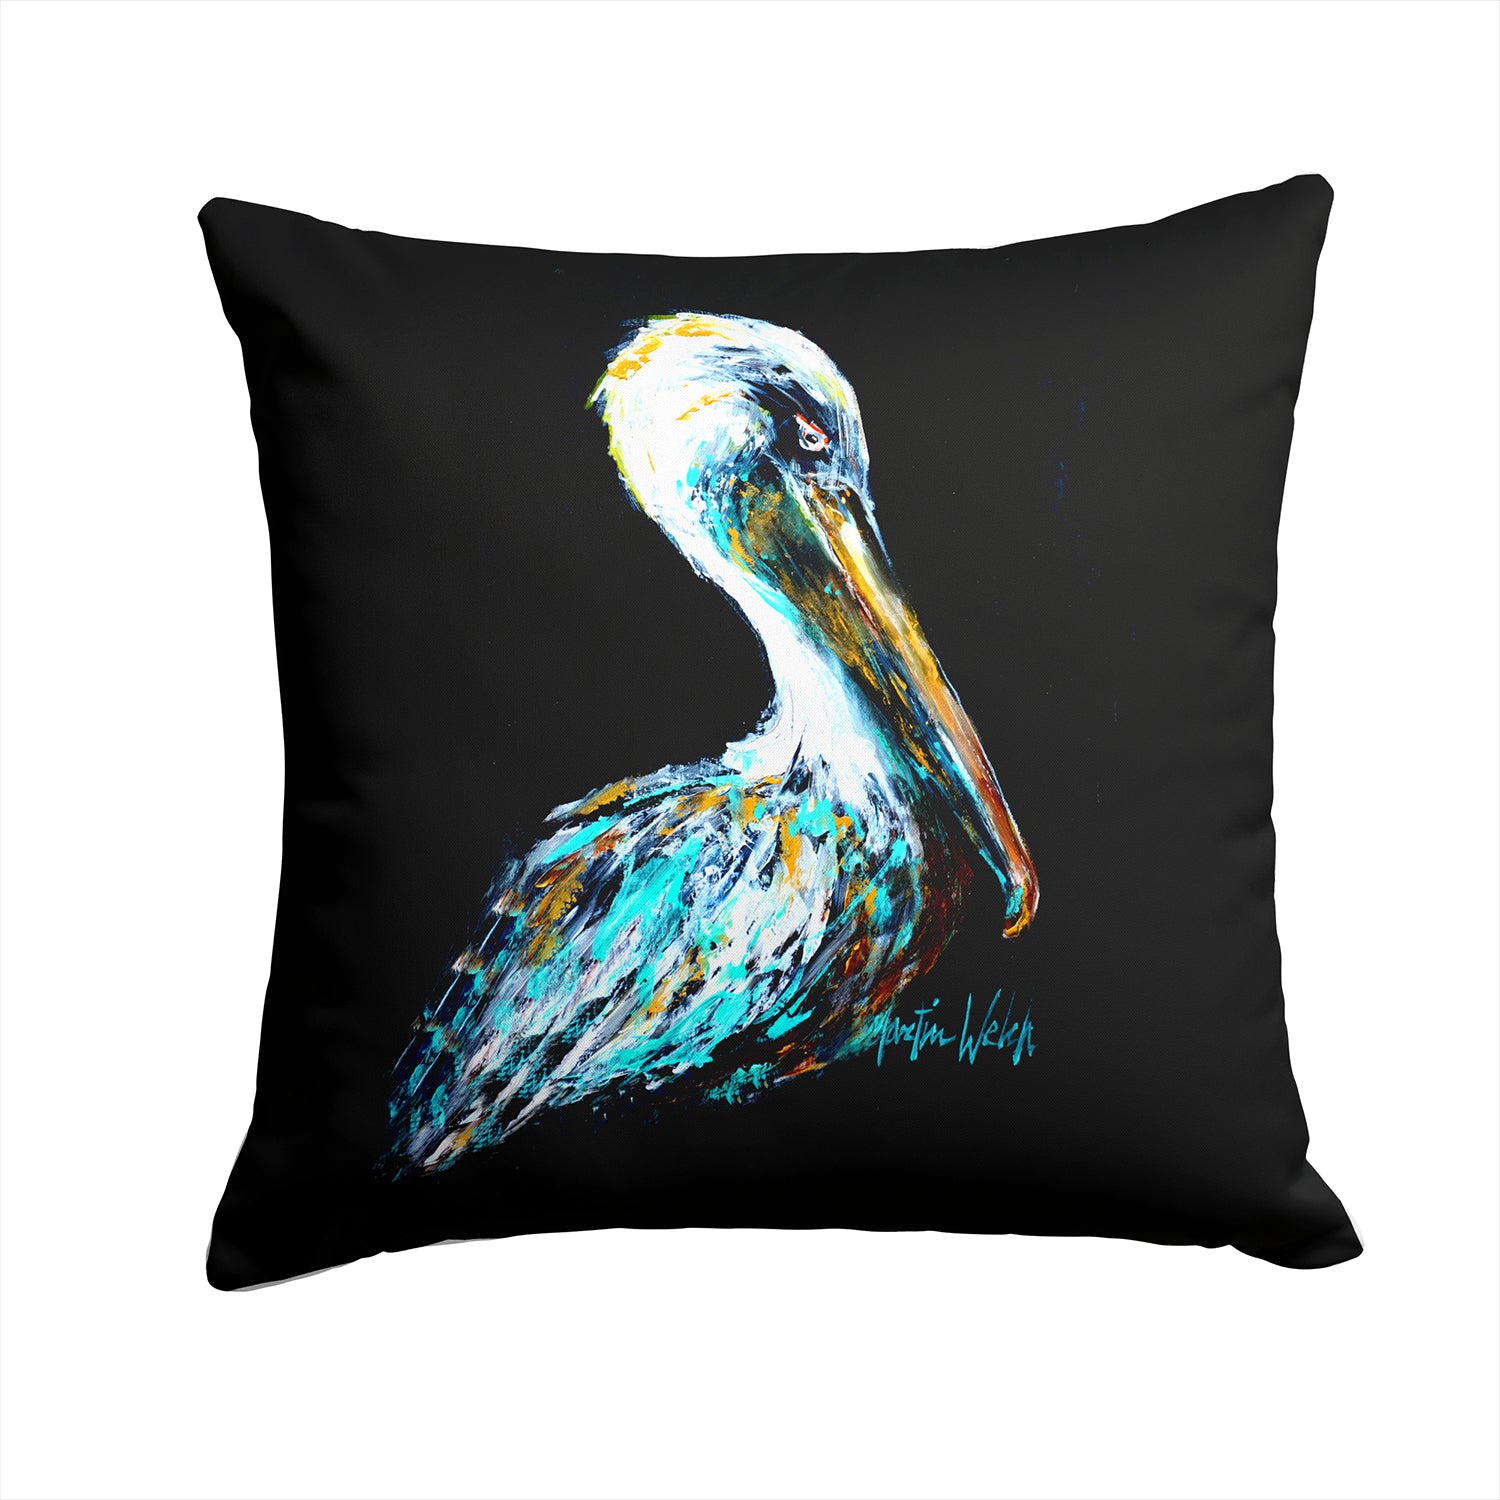 Buy this Dressed in Black Pelican Fabric Decorative Pillow